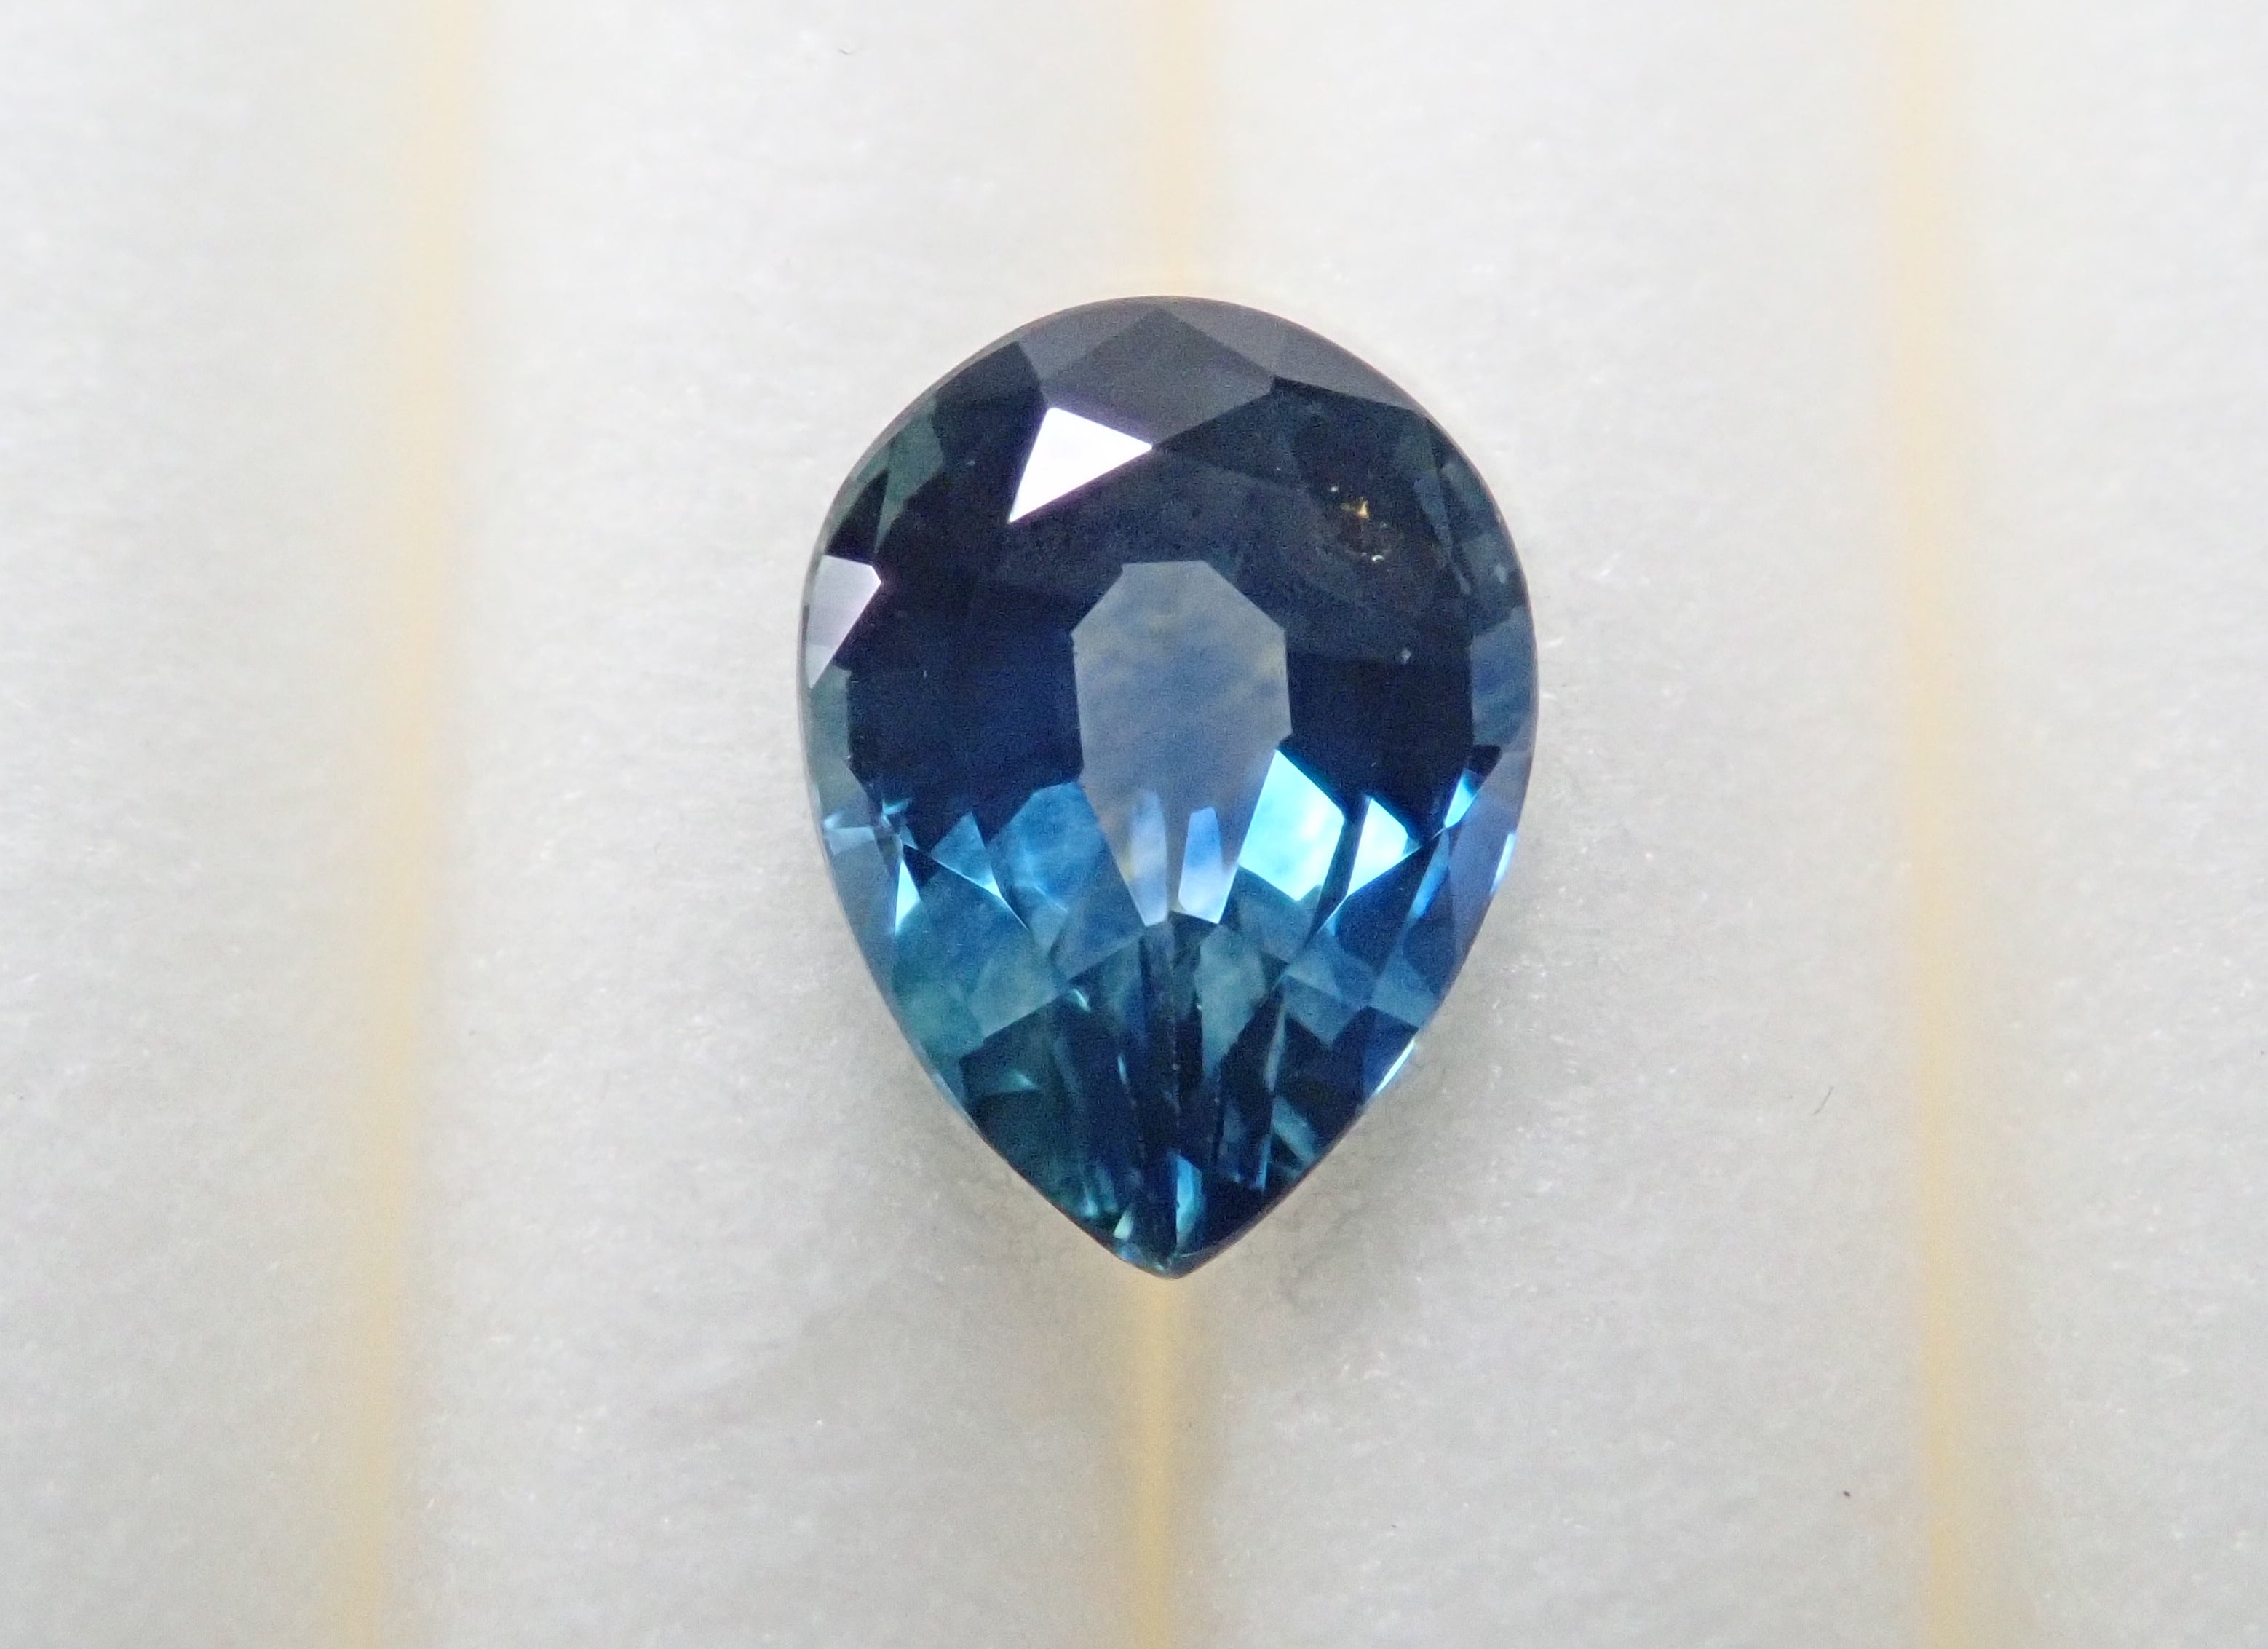 [On sale from 10pm on August 1st] Montana Sapphire 0.319ct Loose (Blue Sapphire)